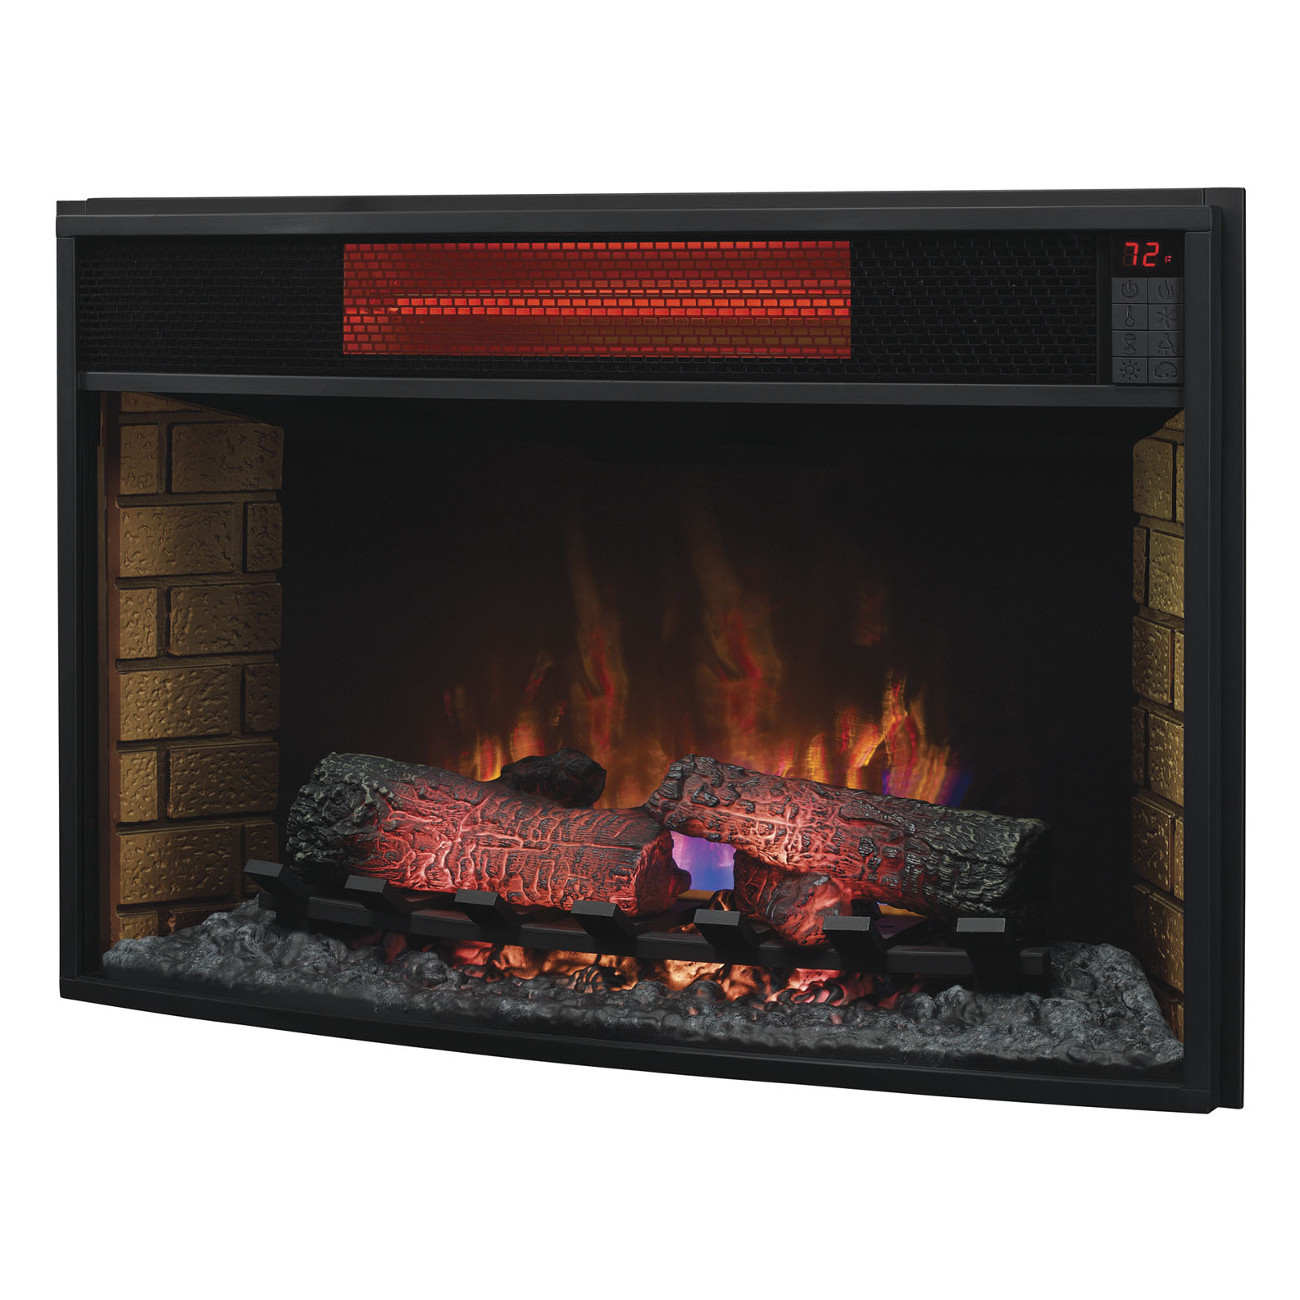 Classicflame Electric Fireplace Insert
 Electric Fireplaces Your 1 source for electric